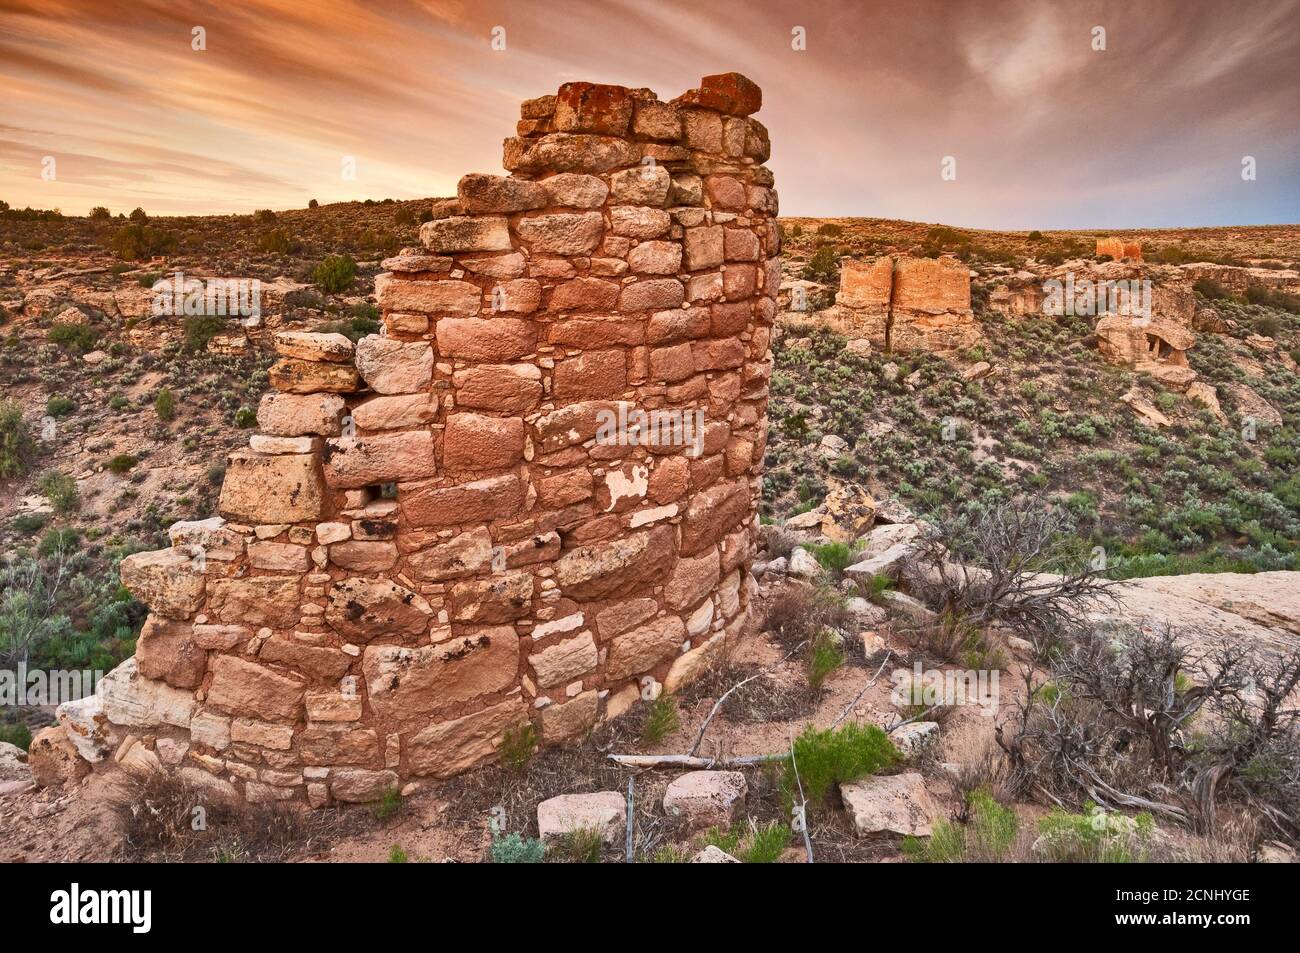 Erodiertes Boulder House, mit Twin Towers in der Ferne, bei Sonnenaufgang, Hovenweep National Monument, Colorado Plateau, Utah, USA Stockfoto